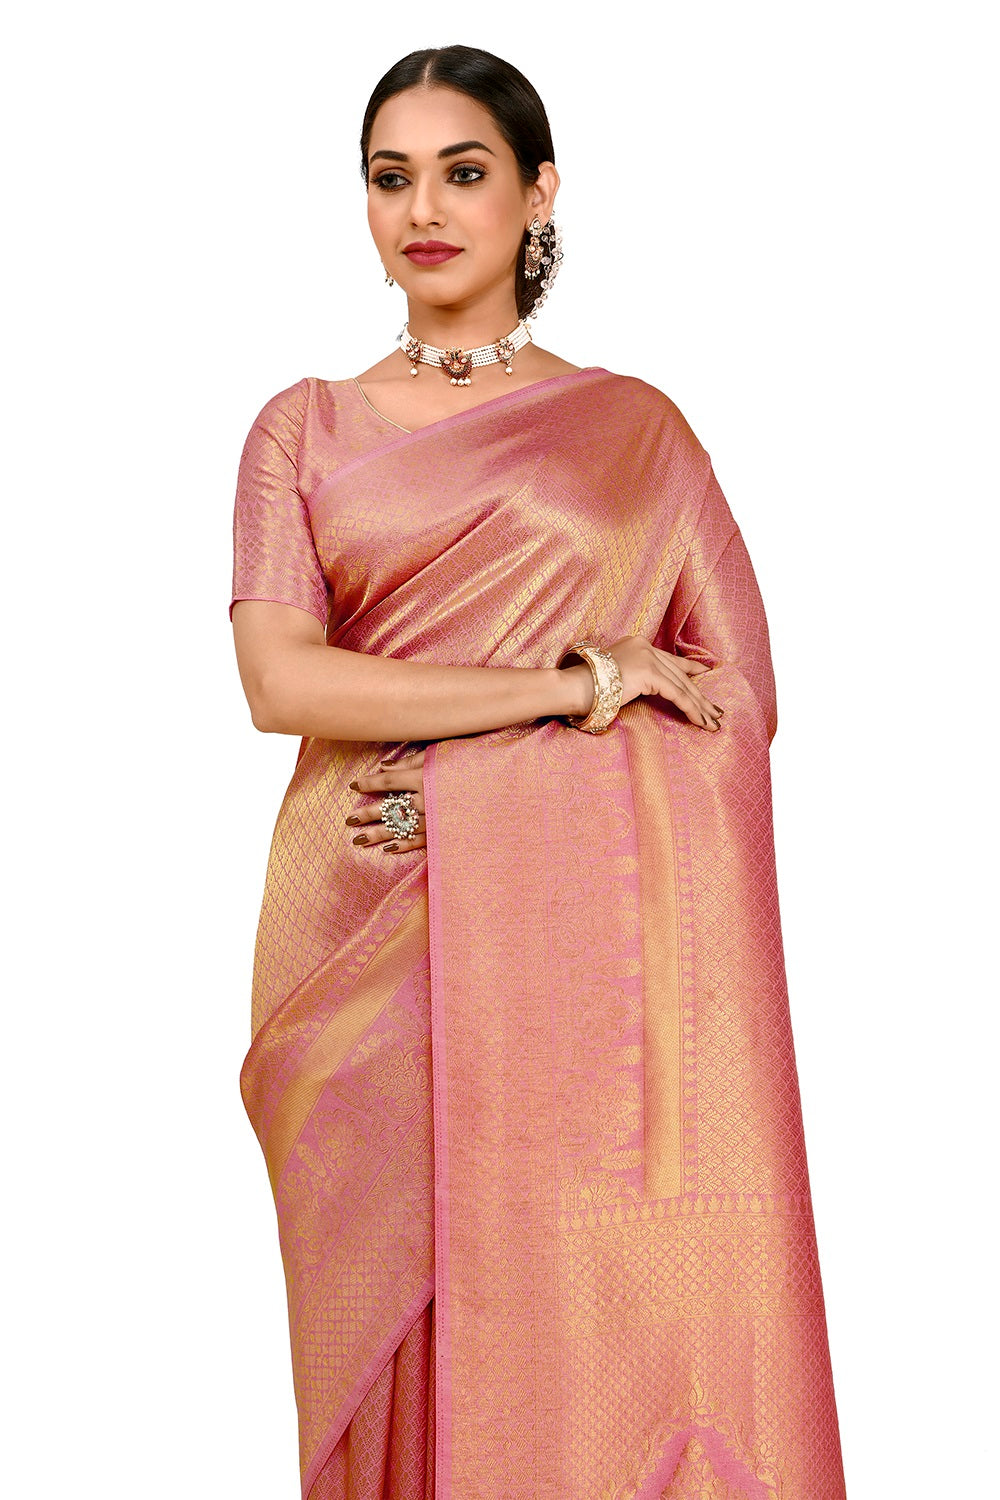 Latest High Neck Blouse Designs For Silk Sarees - South India Trends